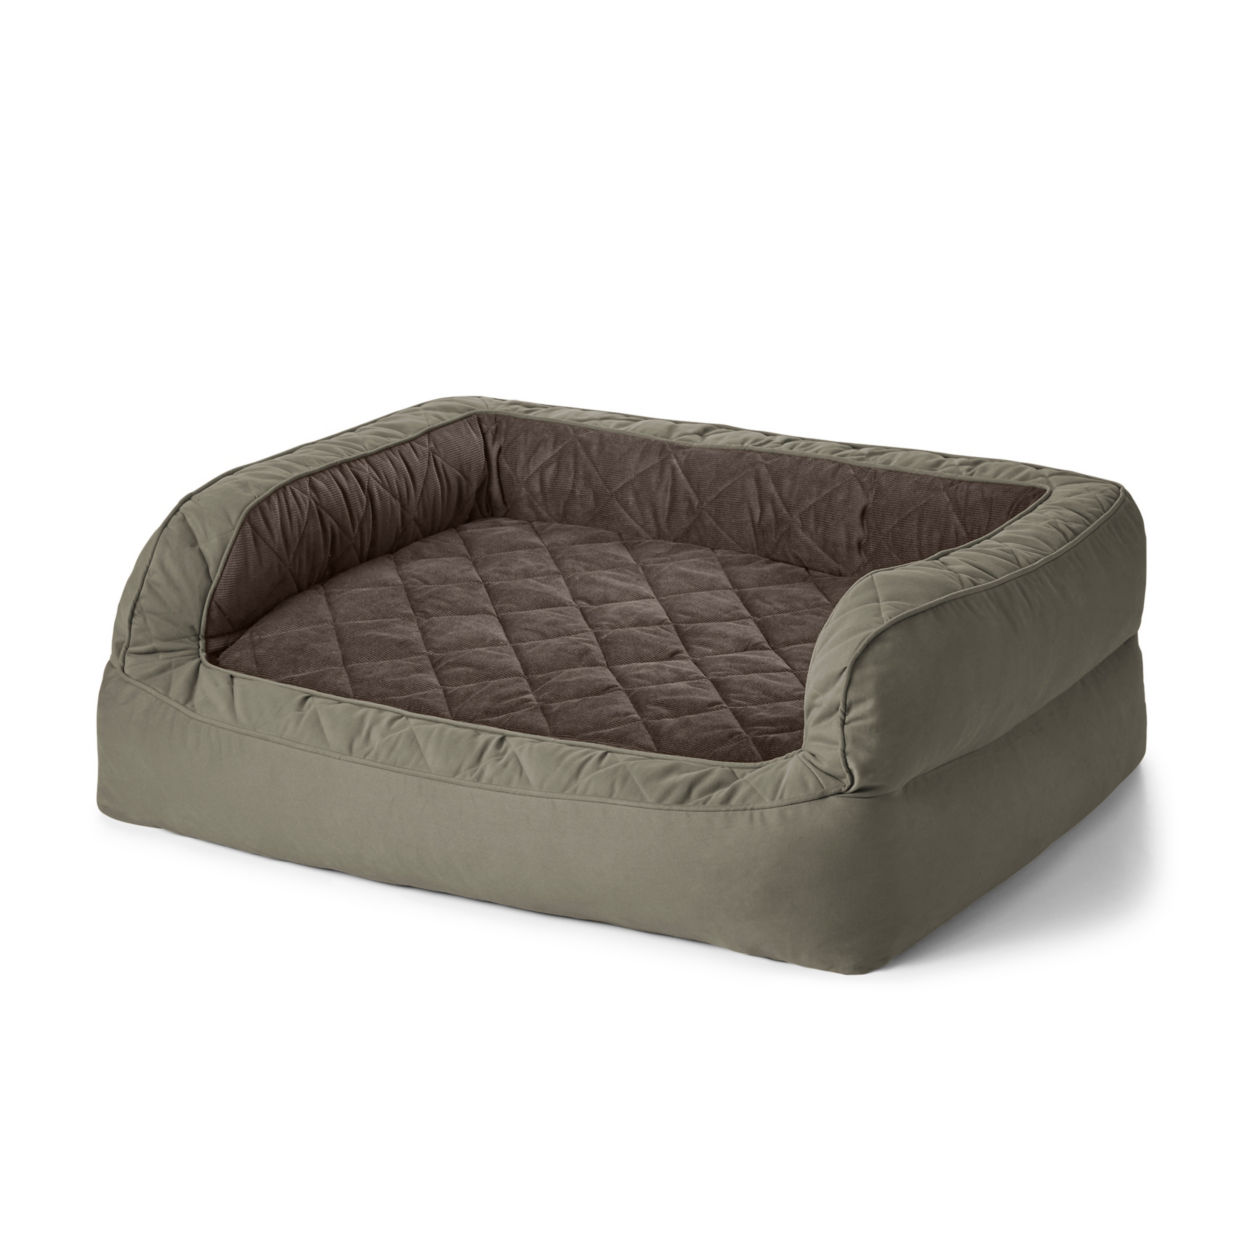 Orvis AirFoam Heritage Couch Dog Bed